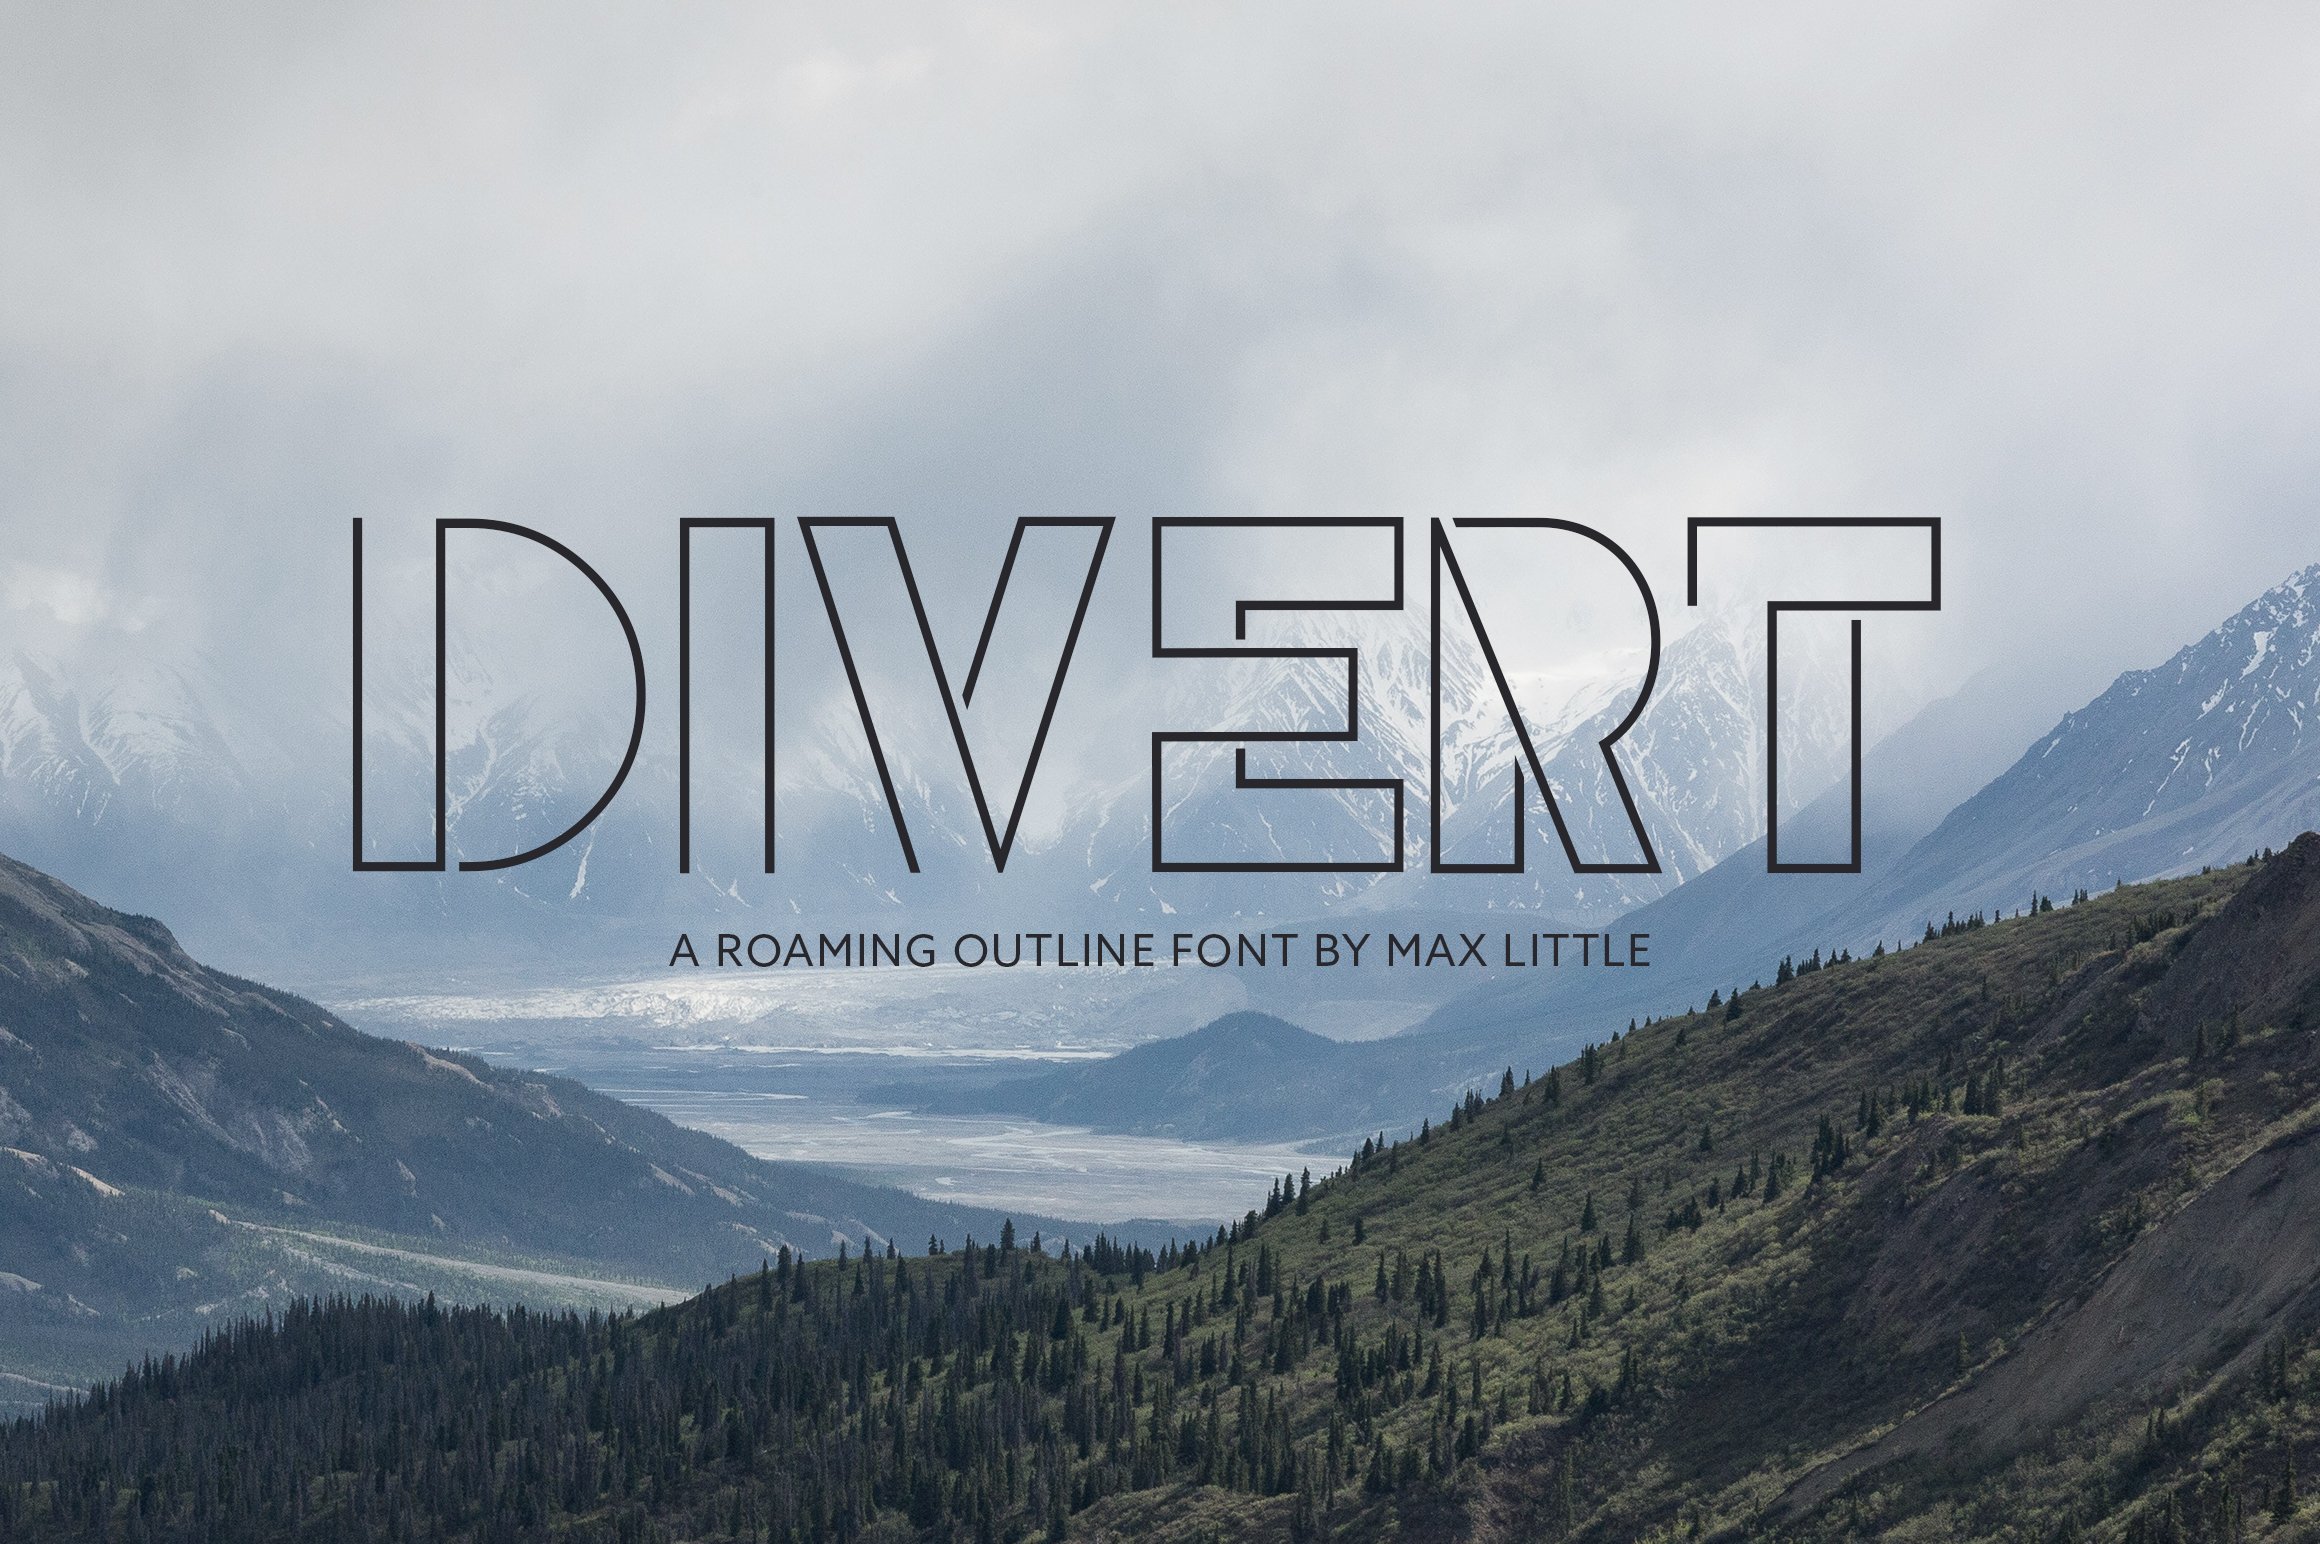 Divert cover image.